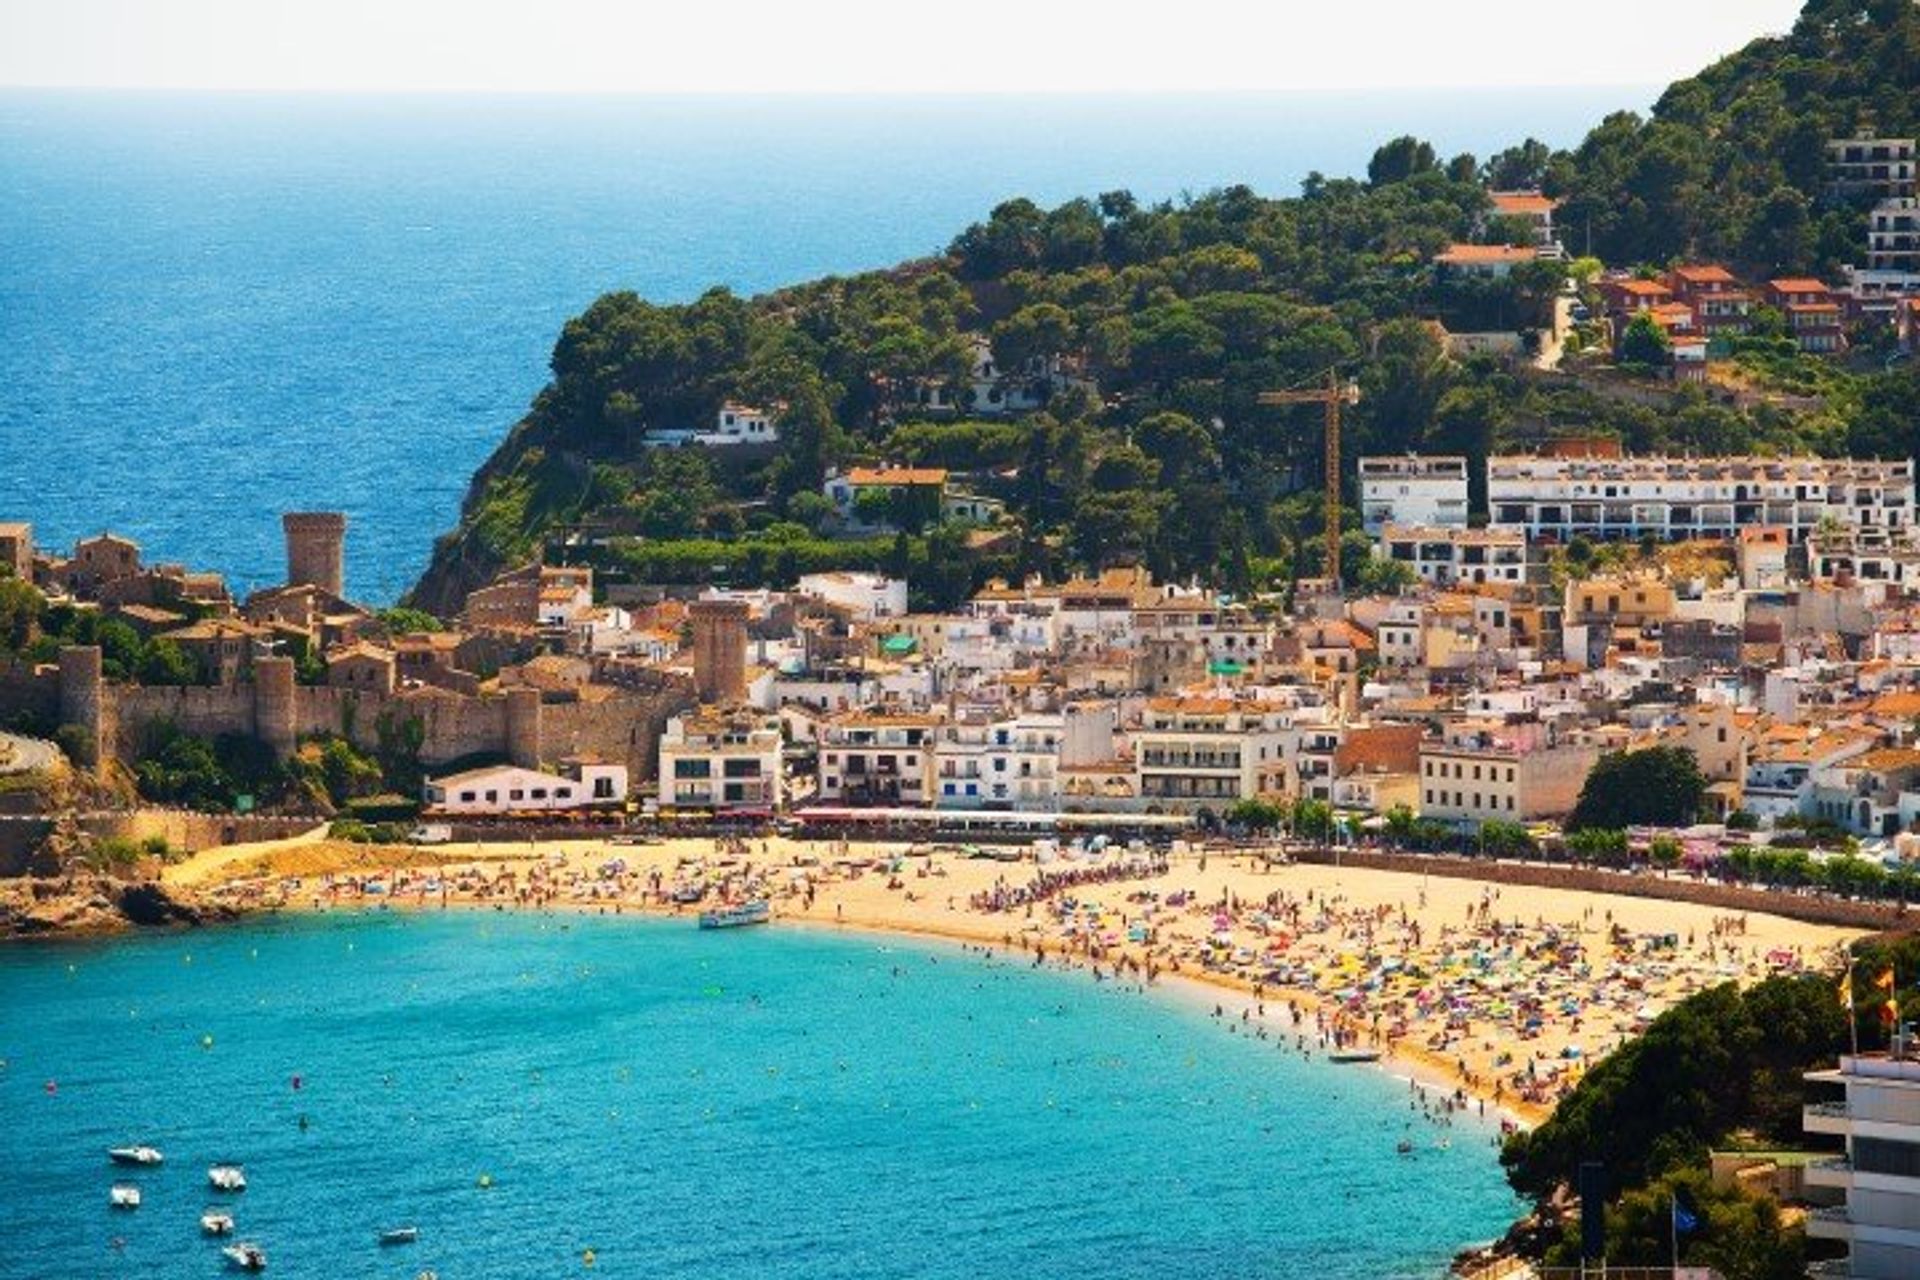 Tossa de Mar's beaches are some of the liveliest in Spain, located between Barcelona and the French border